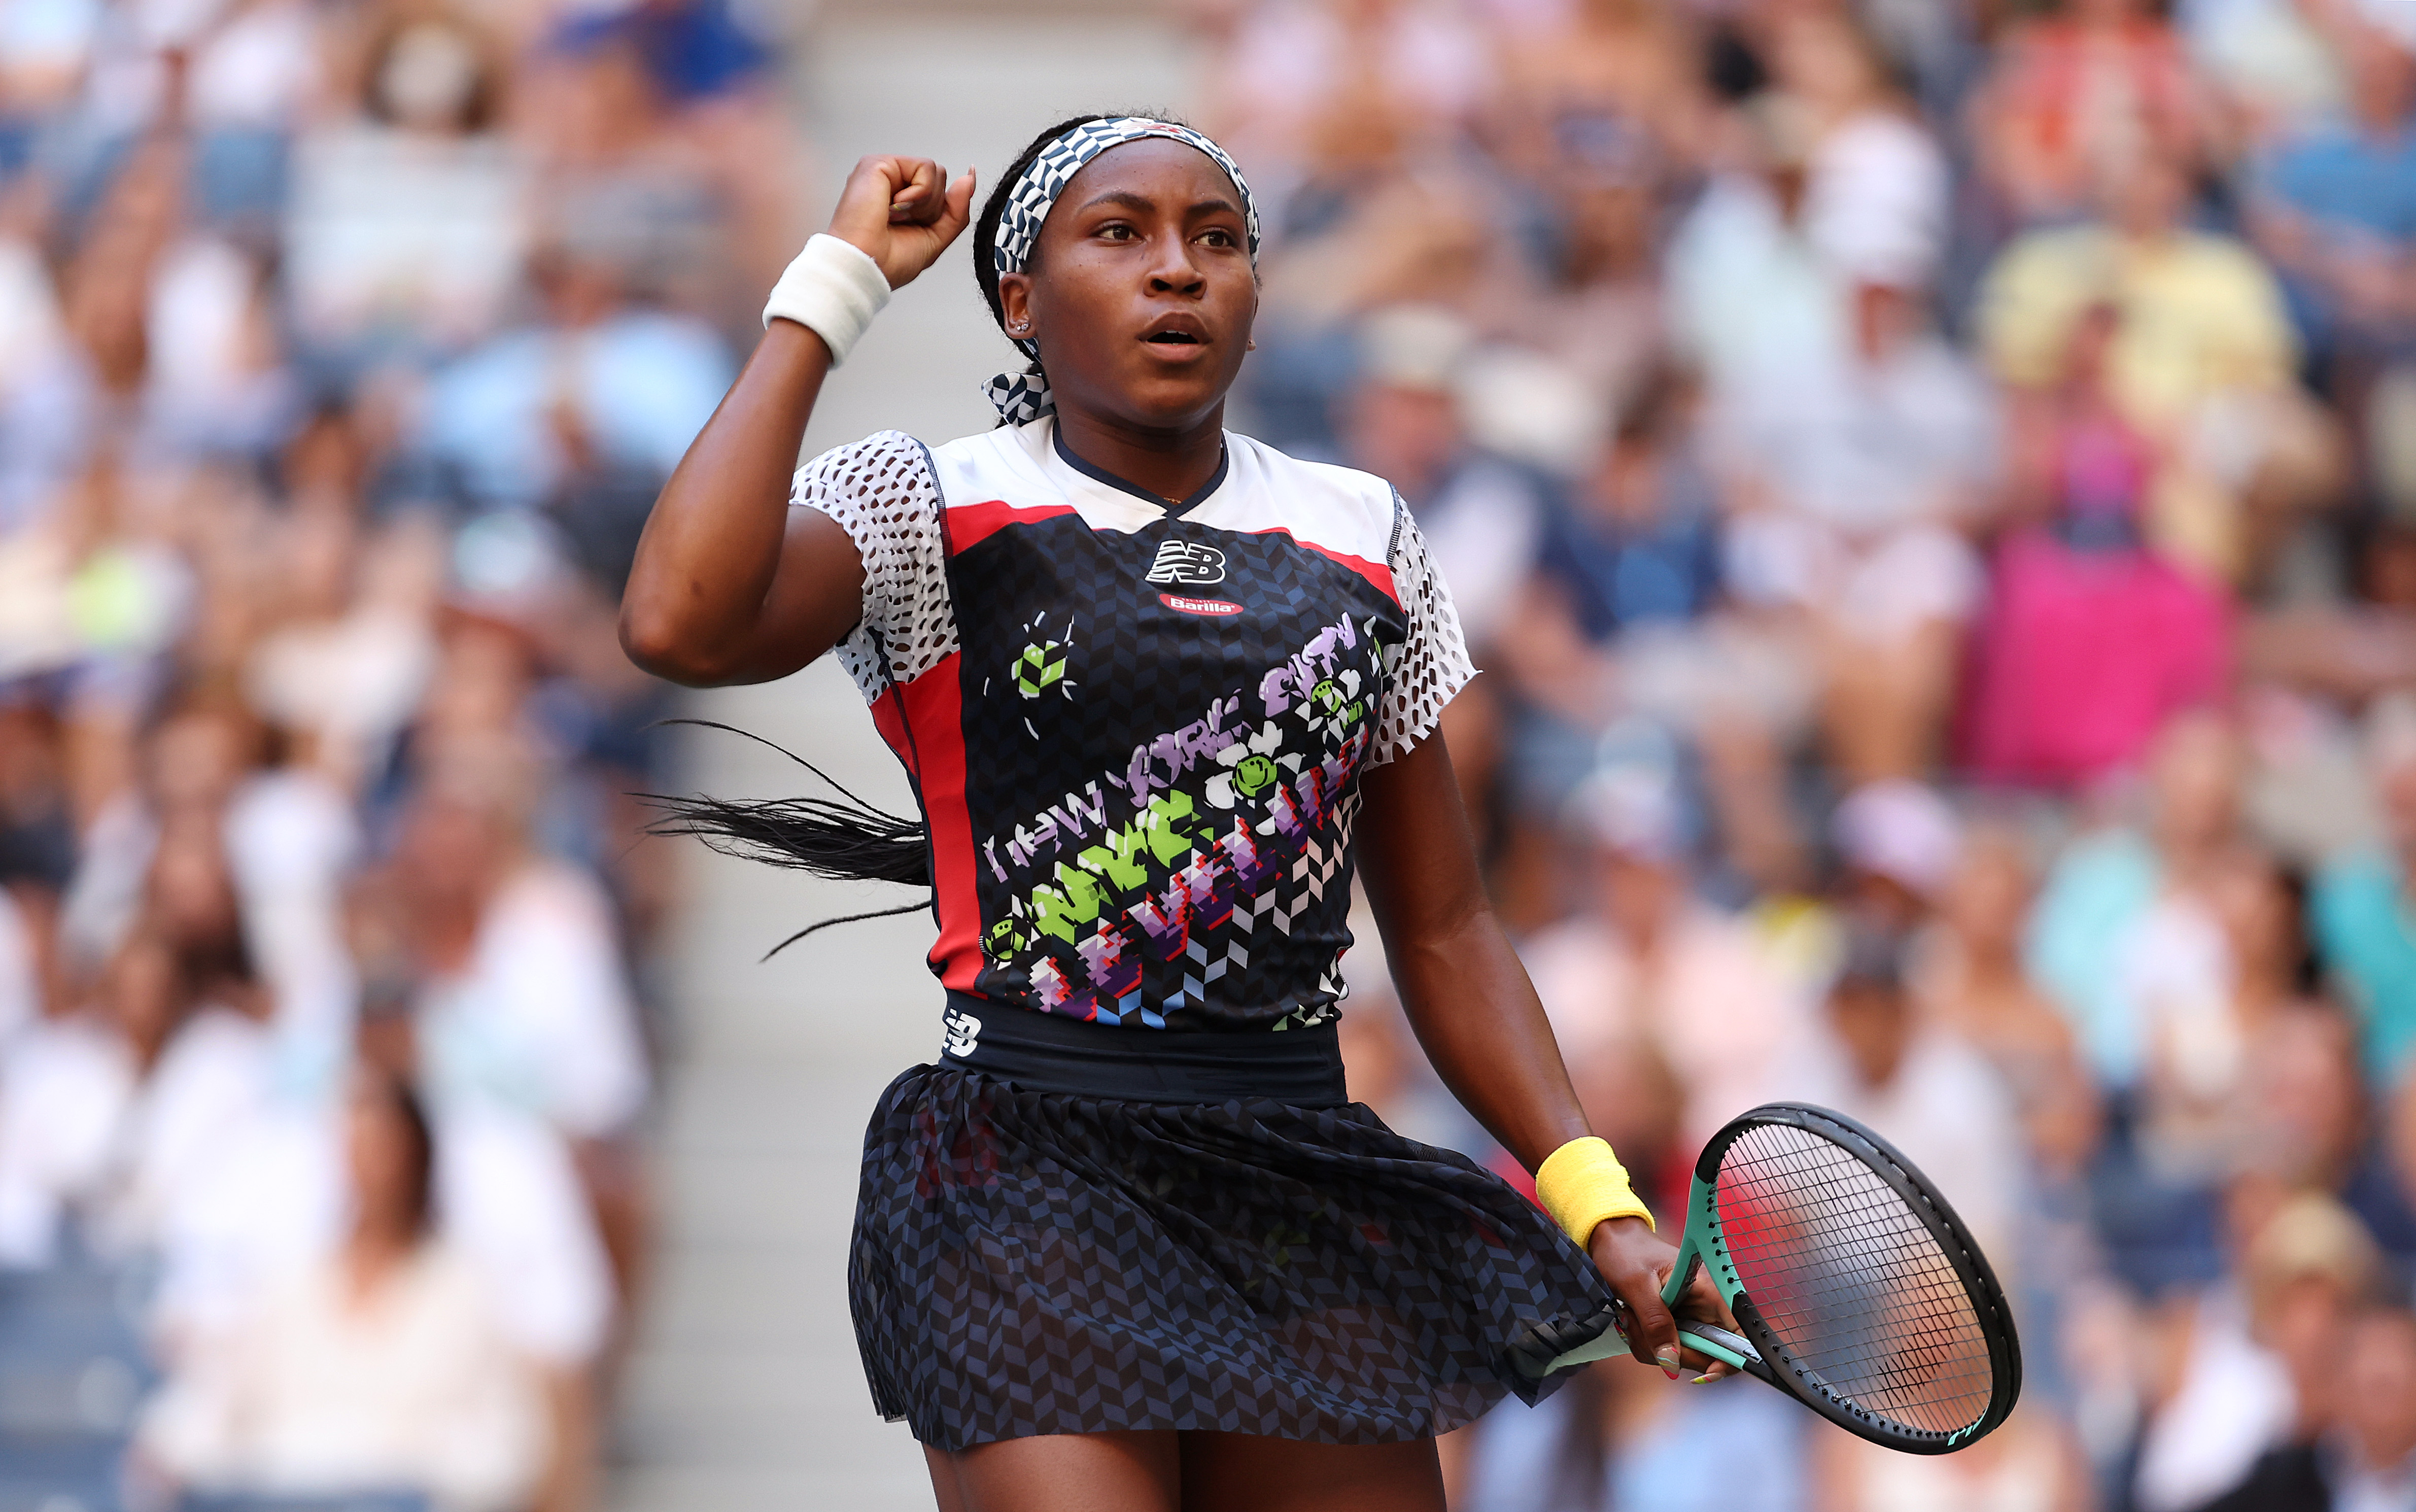 Coco Gauff of the United States celebrates a point against Madison Keys of the United States during their Women’s Singles Third Round match on Day Five of the 2022 US Open at USTA Billie Jean King National Tennis Center on September 02, 2022 in the Flushing neighborhood of the Queens borough of New York City.